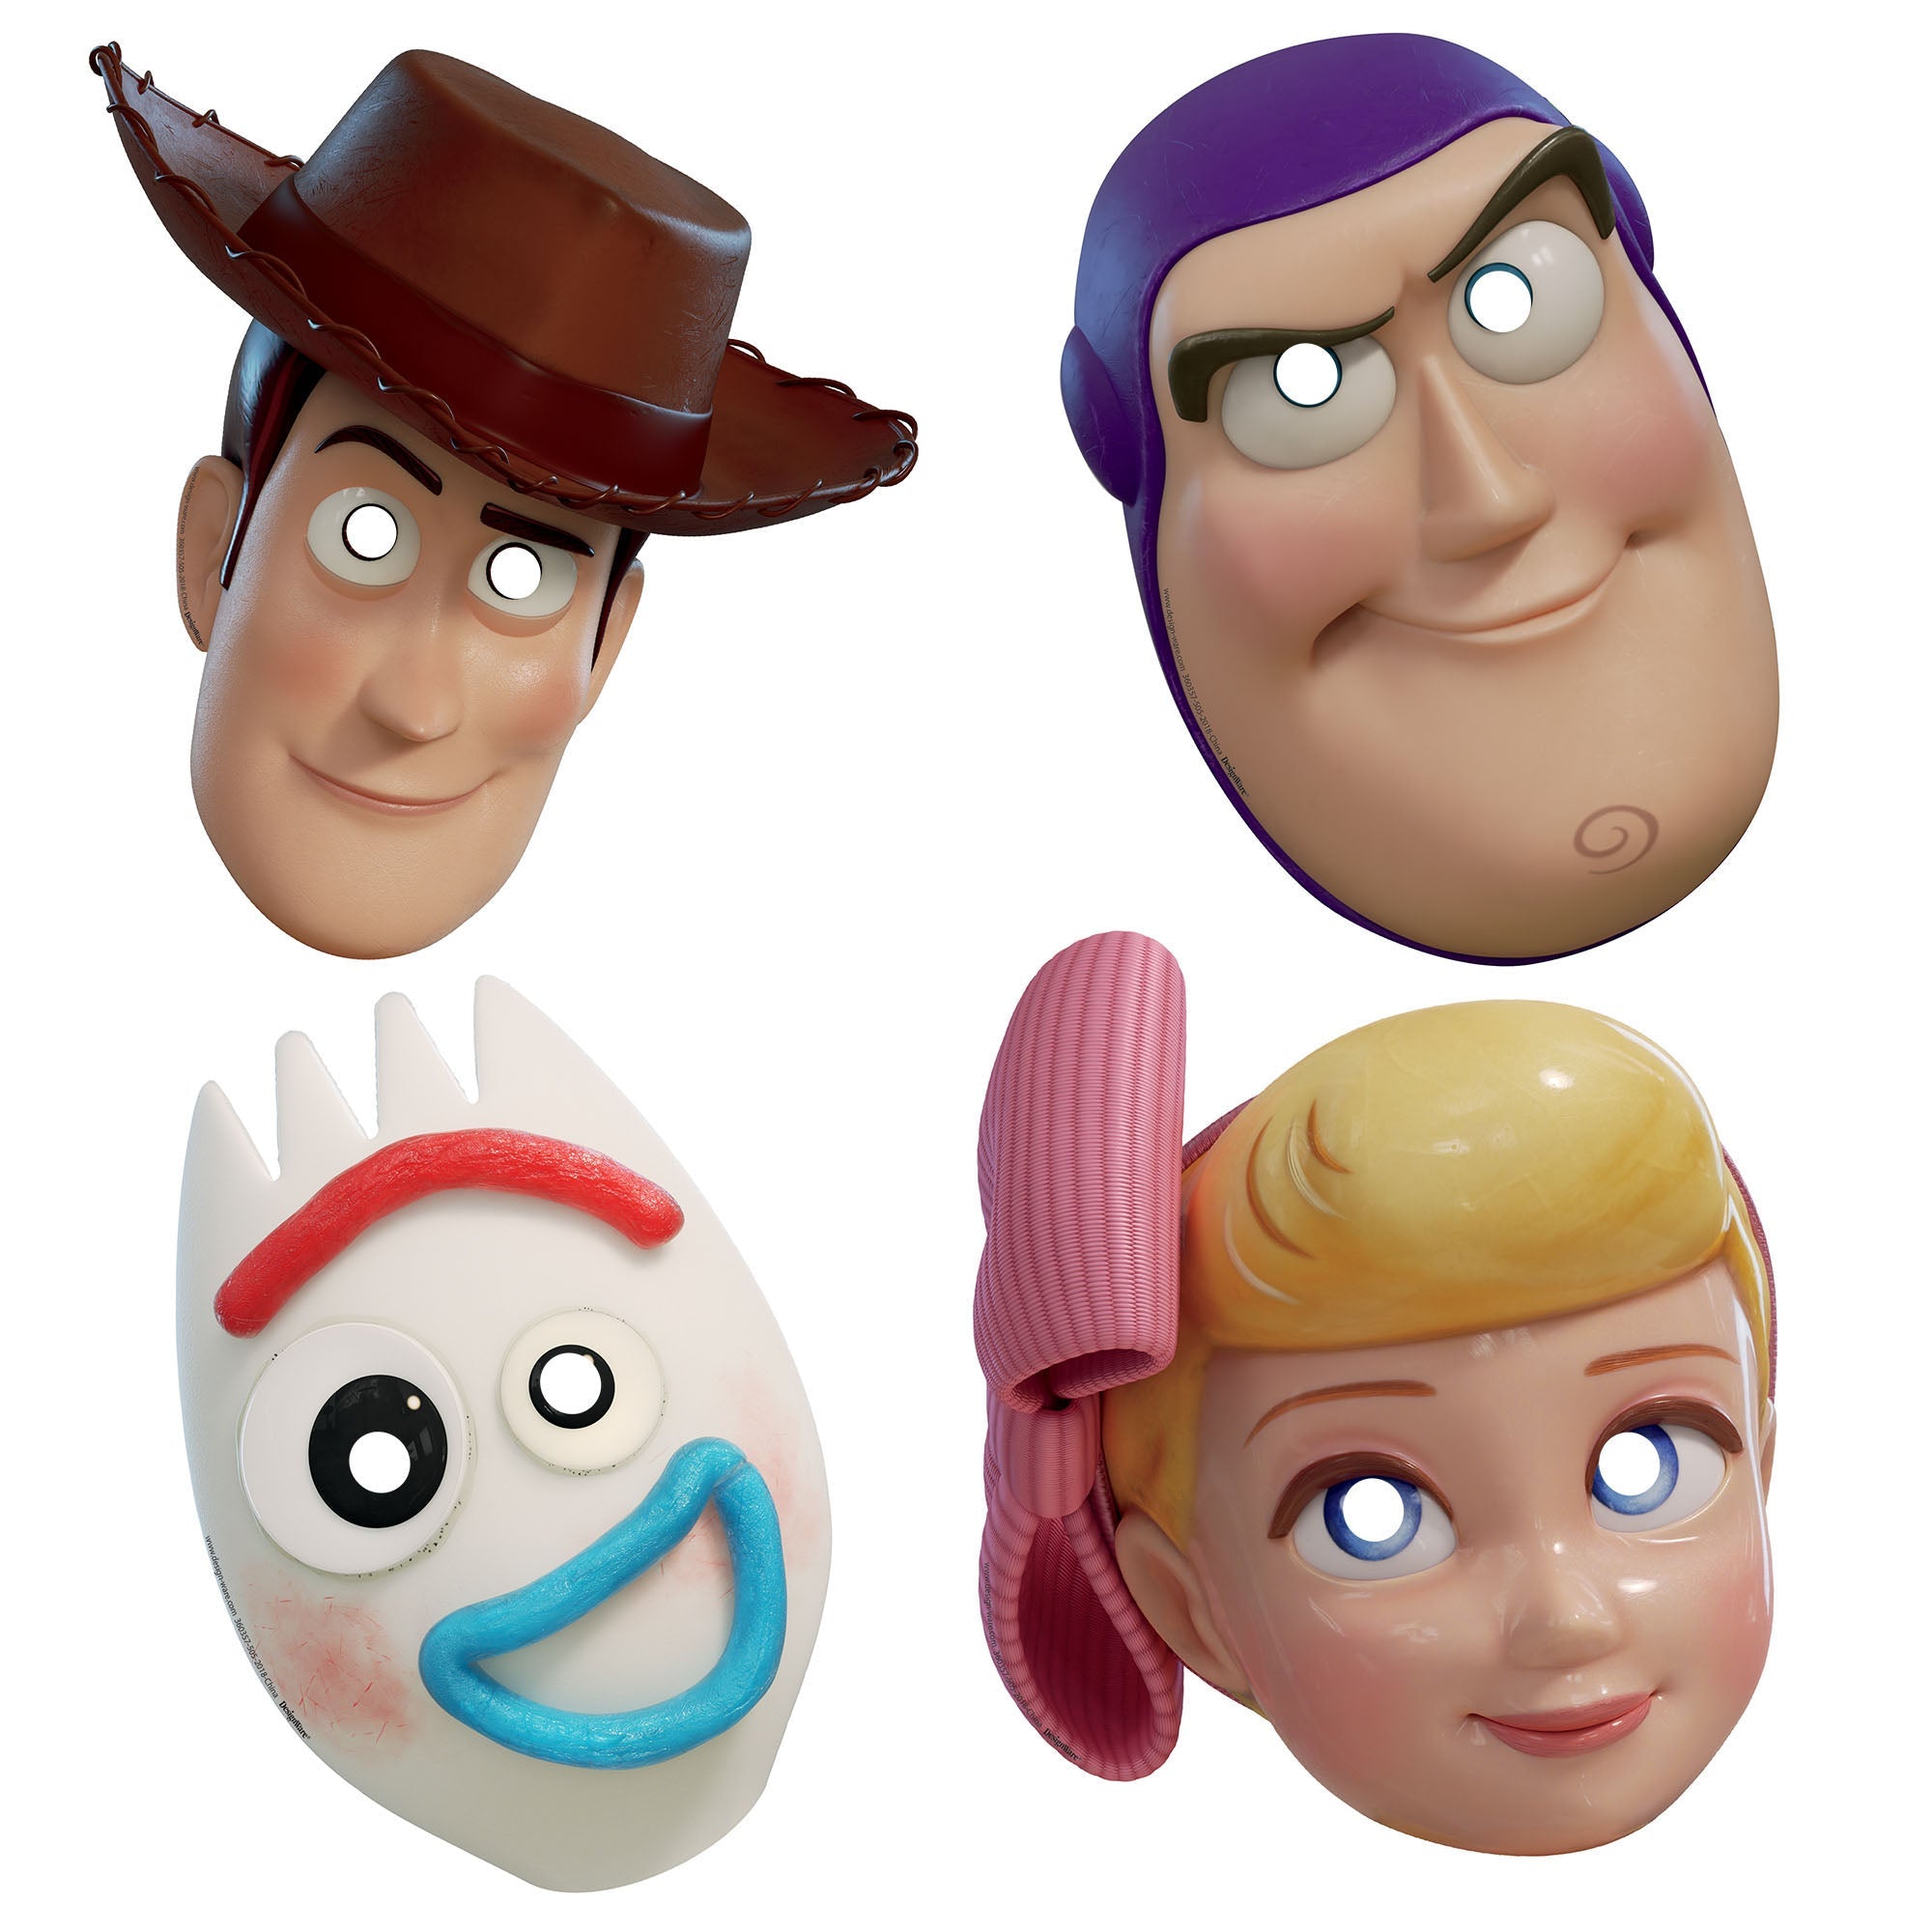 ©Disney/Pixar Toy Story 4 package of 8 Paper Character Masks